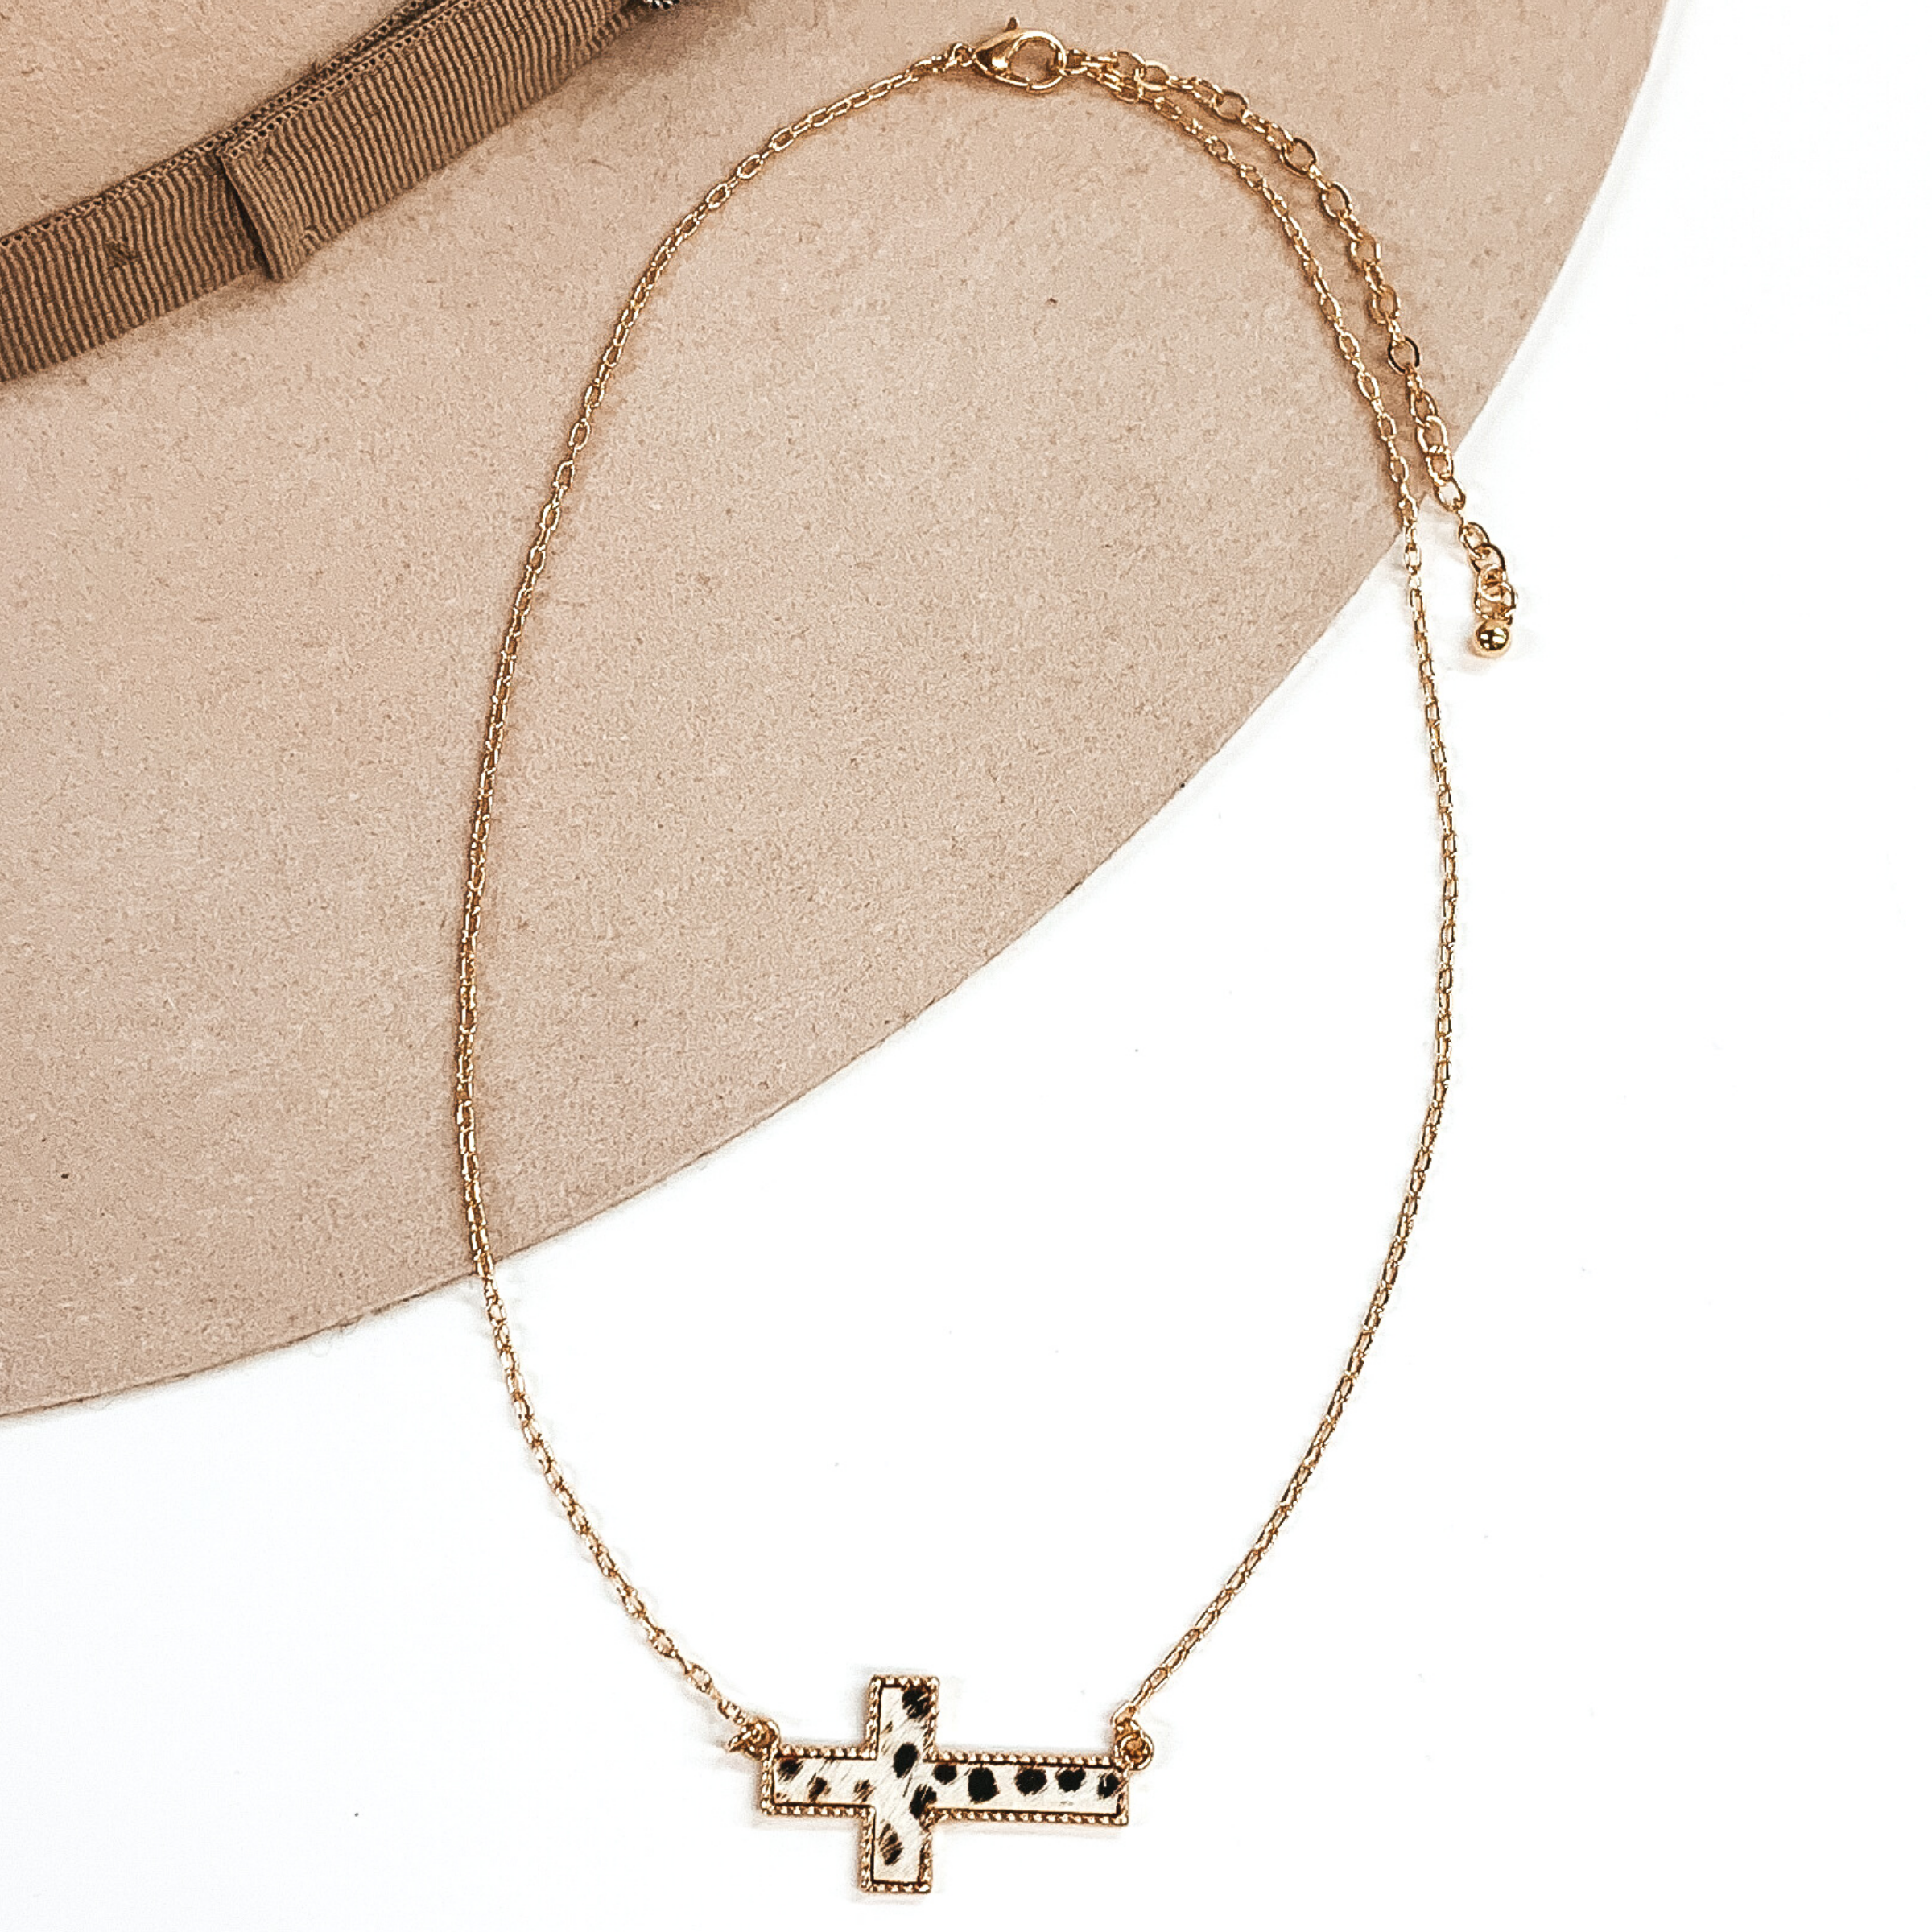 Gold paperclip chain with a cross pendant. The pendant has a white hide inlay with black dots. this necklace is pictured on a white and beige background. 